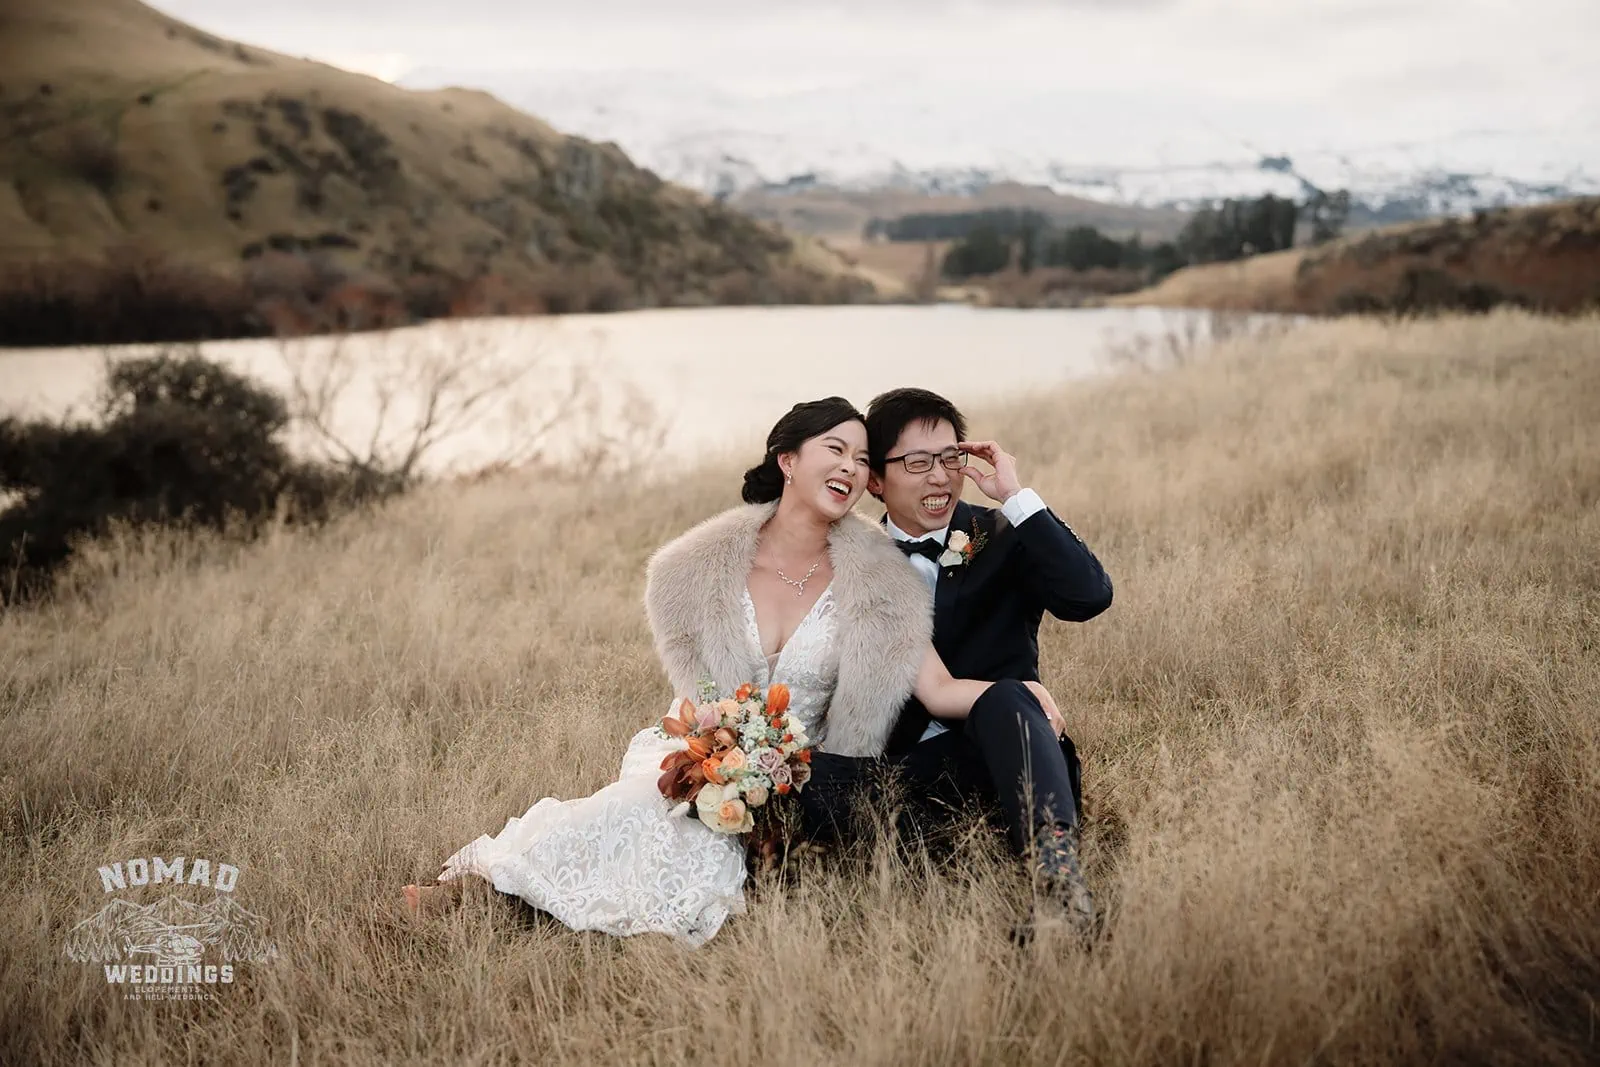 Keywords used: New Zealand, Queenstown

Description: Joanna and Tony, a bride and groom from New Zealand, pose for a pre-wedding photoshoot in the stunning fields of Queenstown with